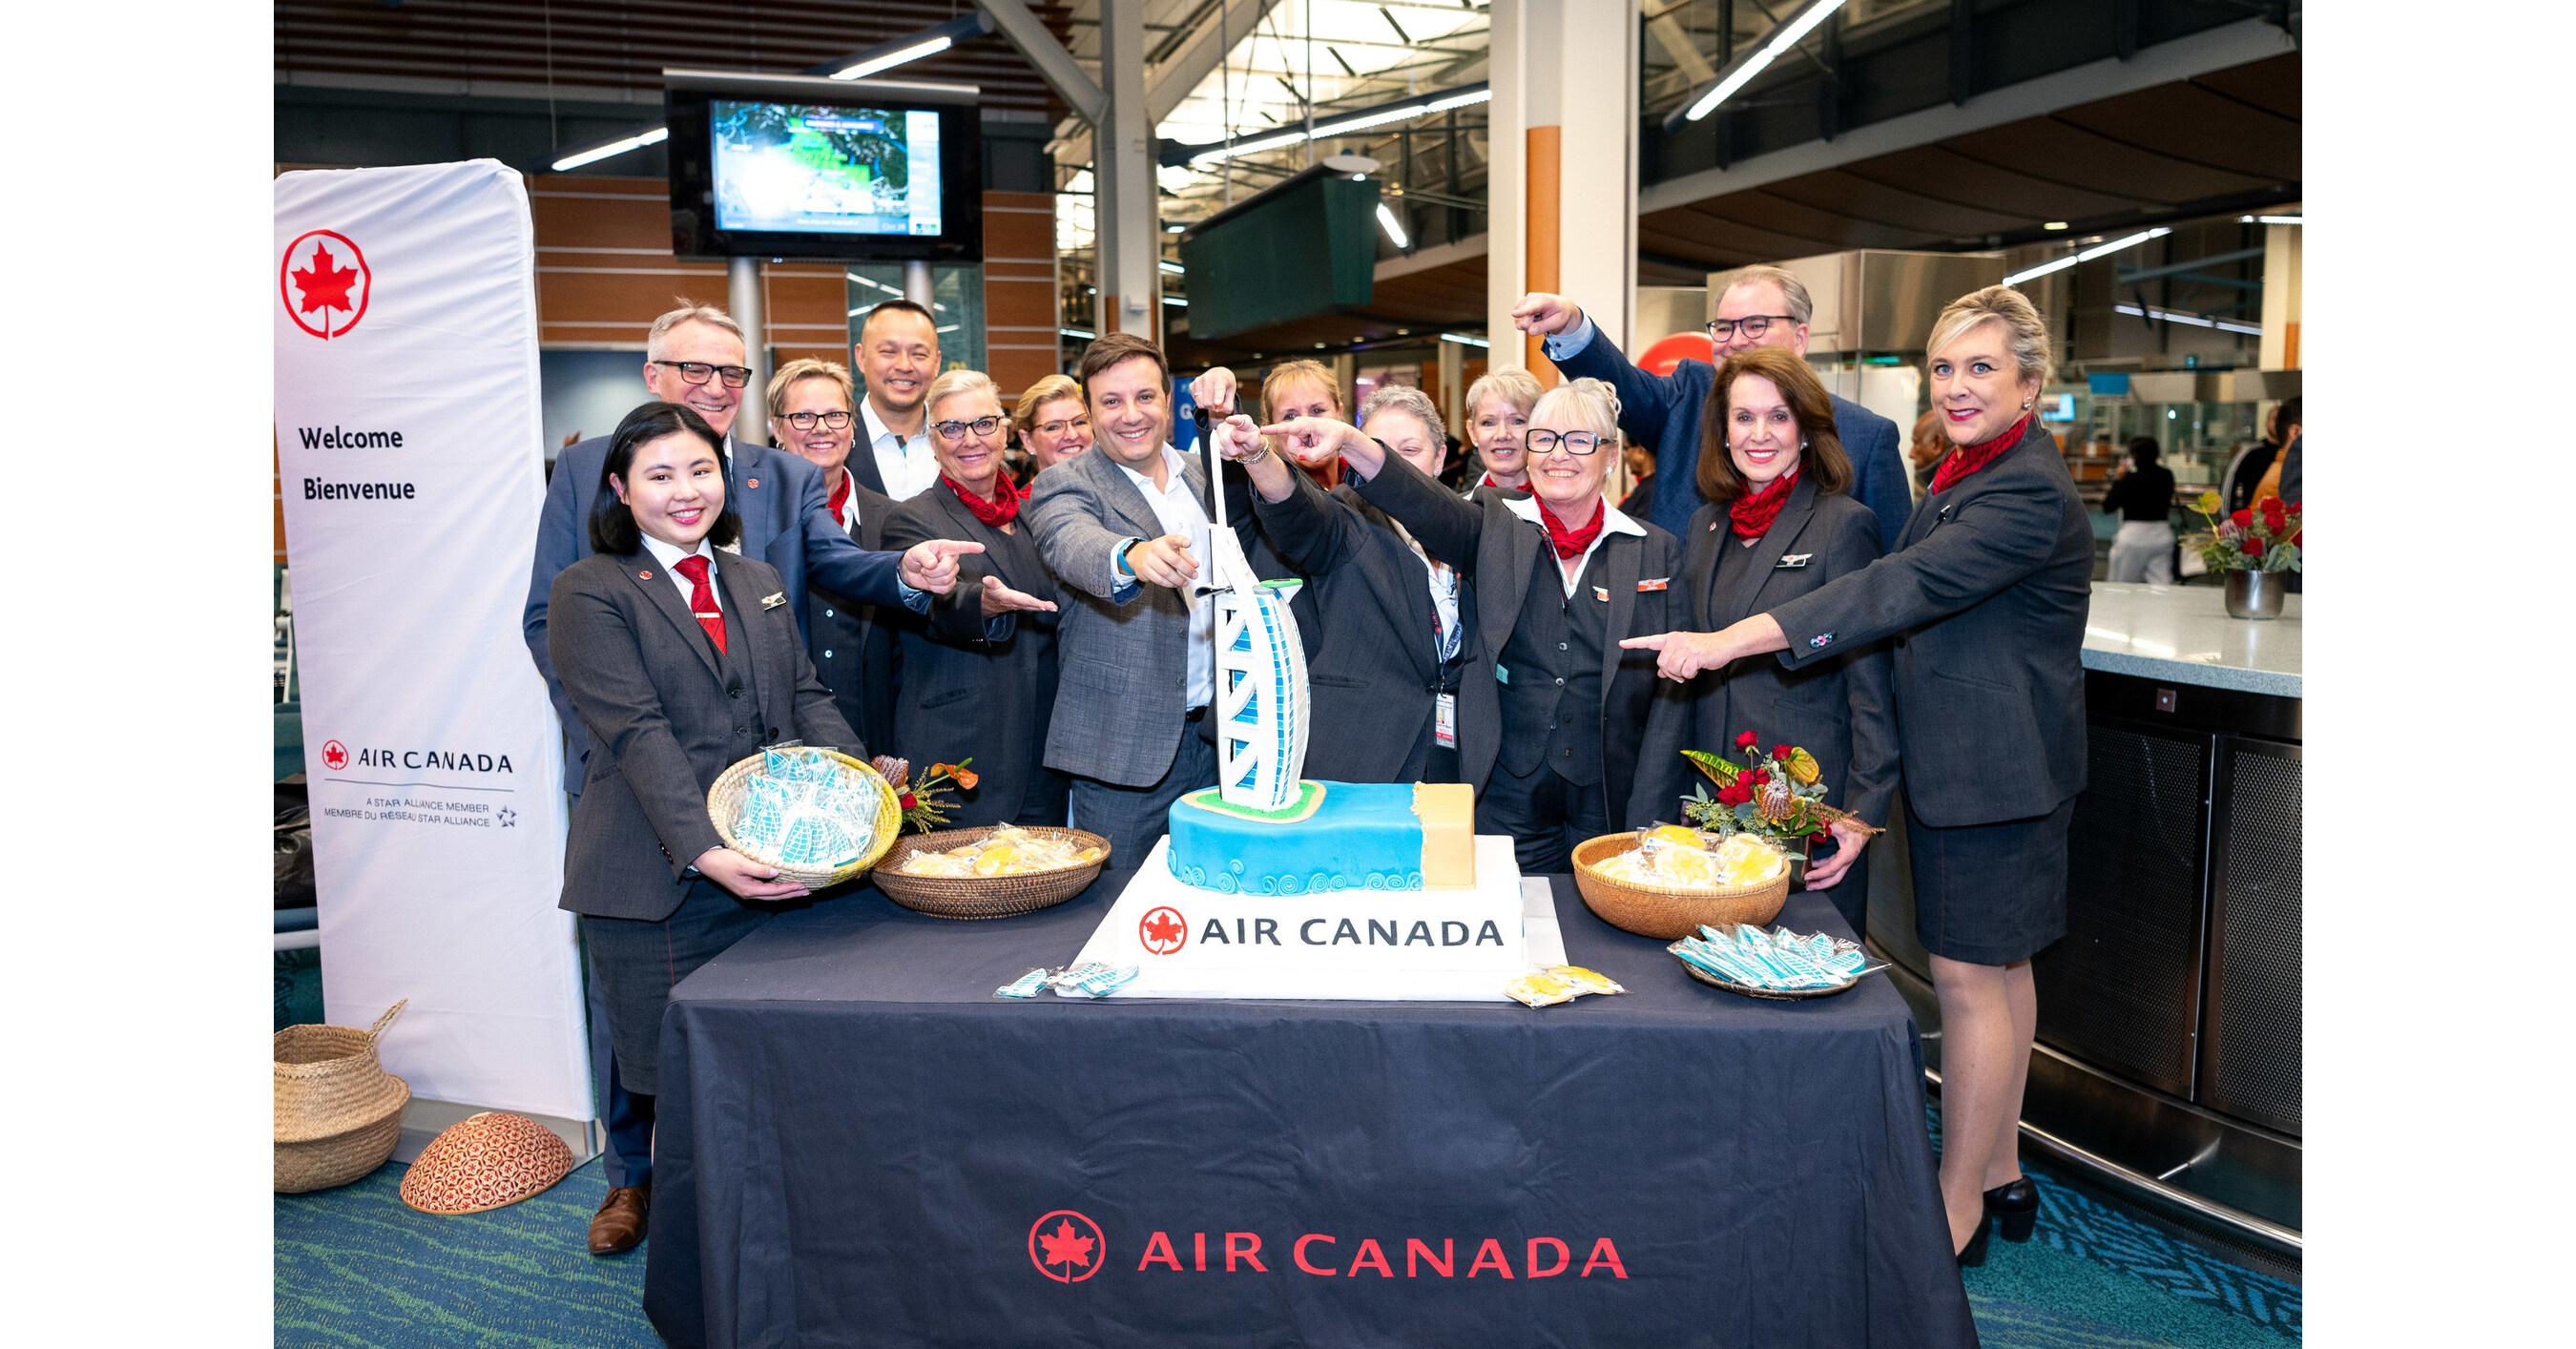 Air Canada’s Inaugural Flight from Vancouver Arrives in Dubai